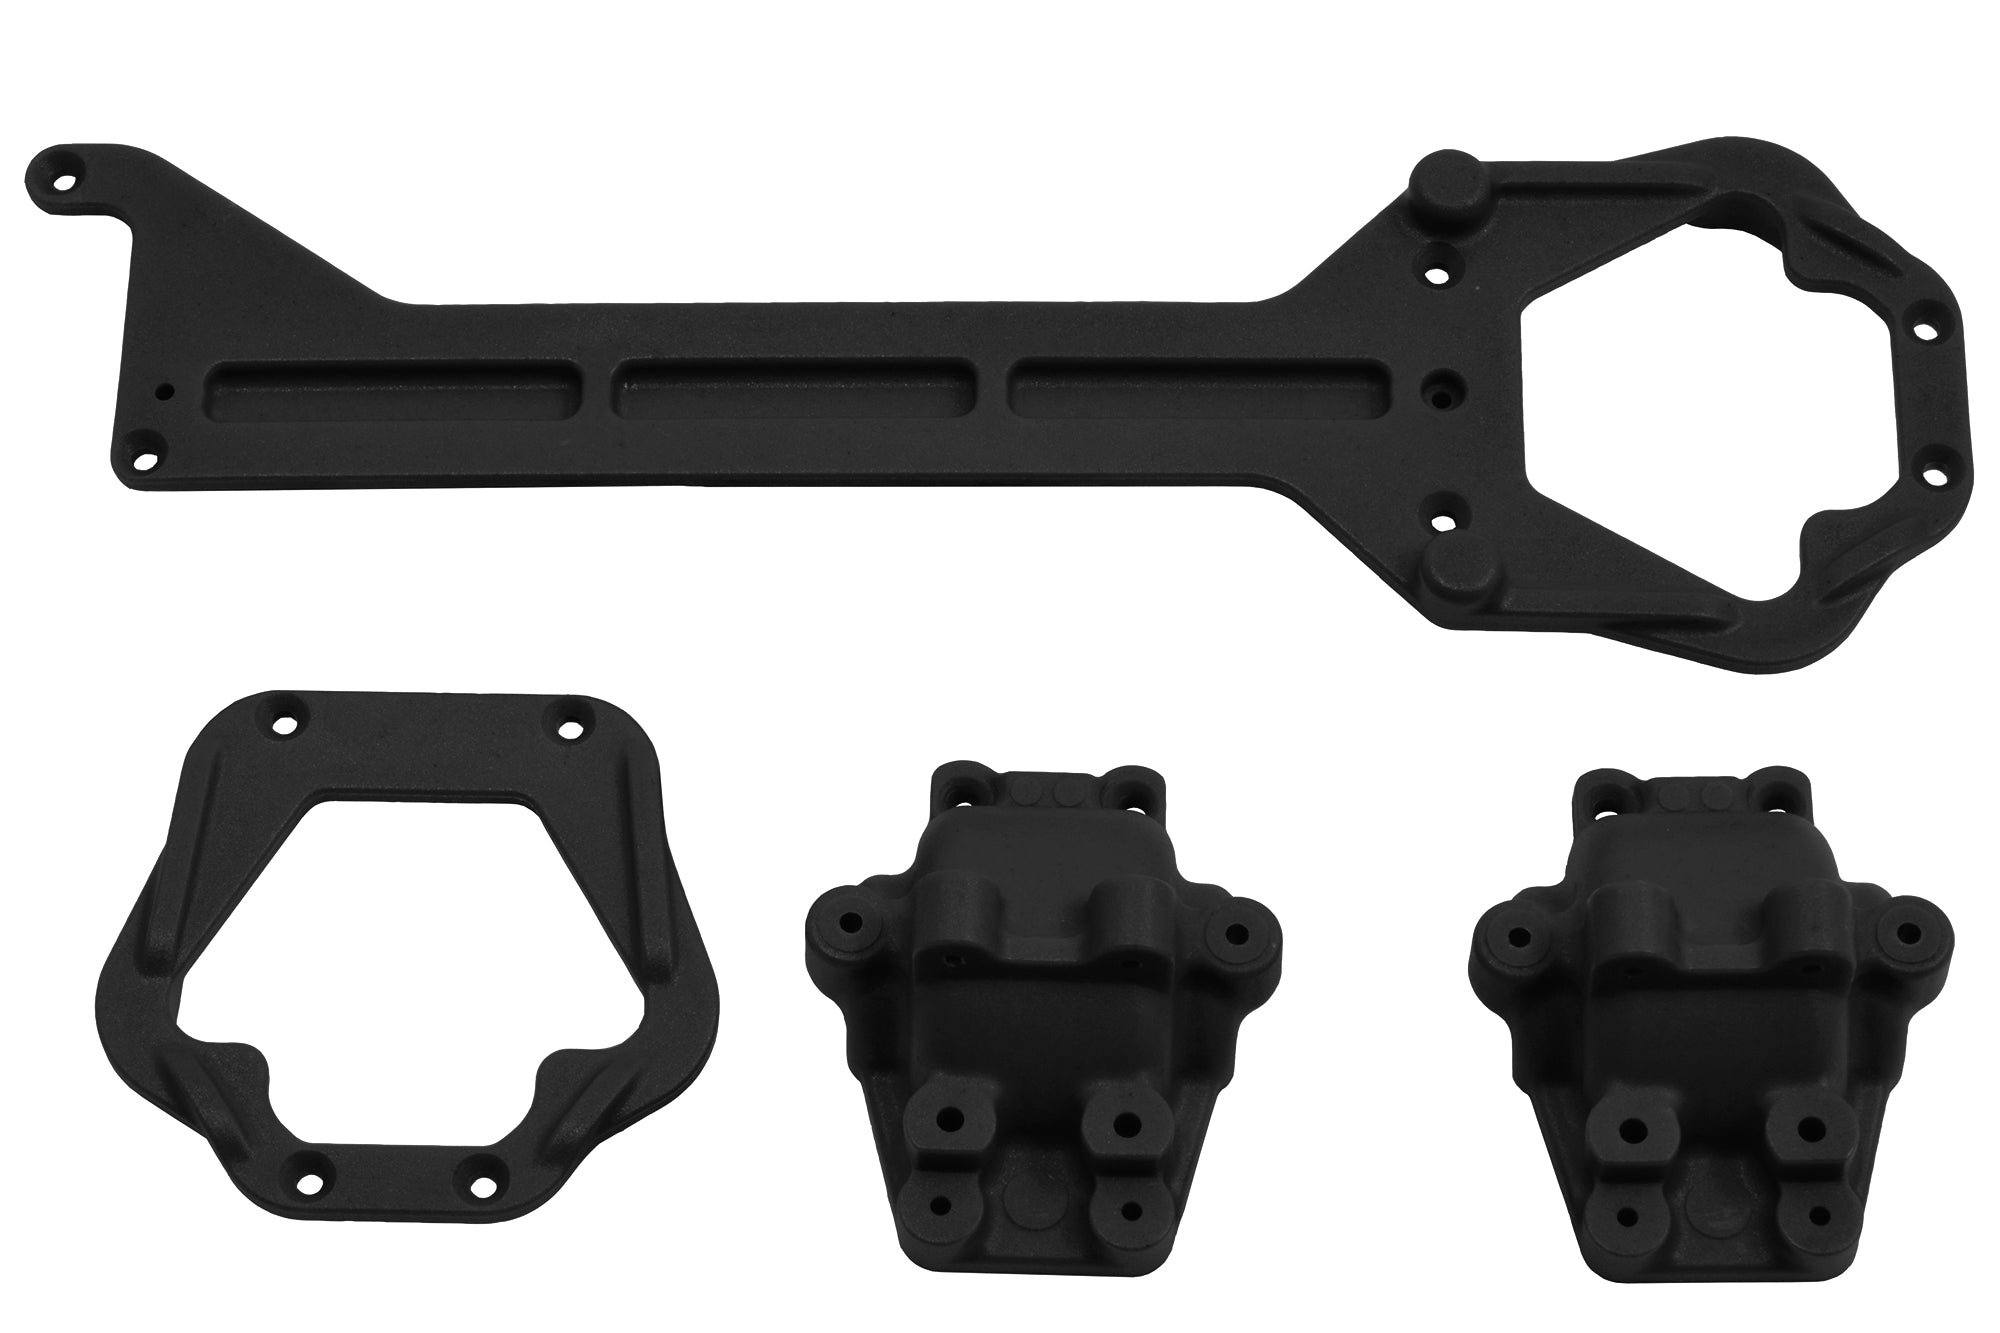 RPM 70792 Front & Rear Upper Chassis & Differential Covers for the LaTrax Teton & Rally